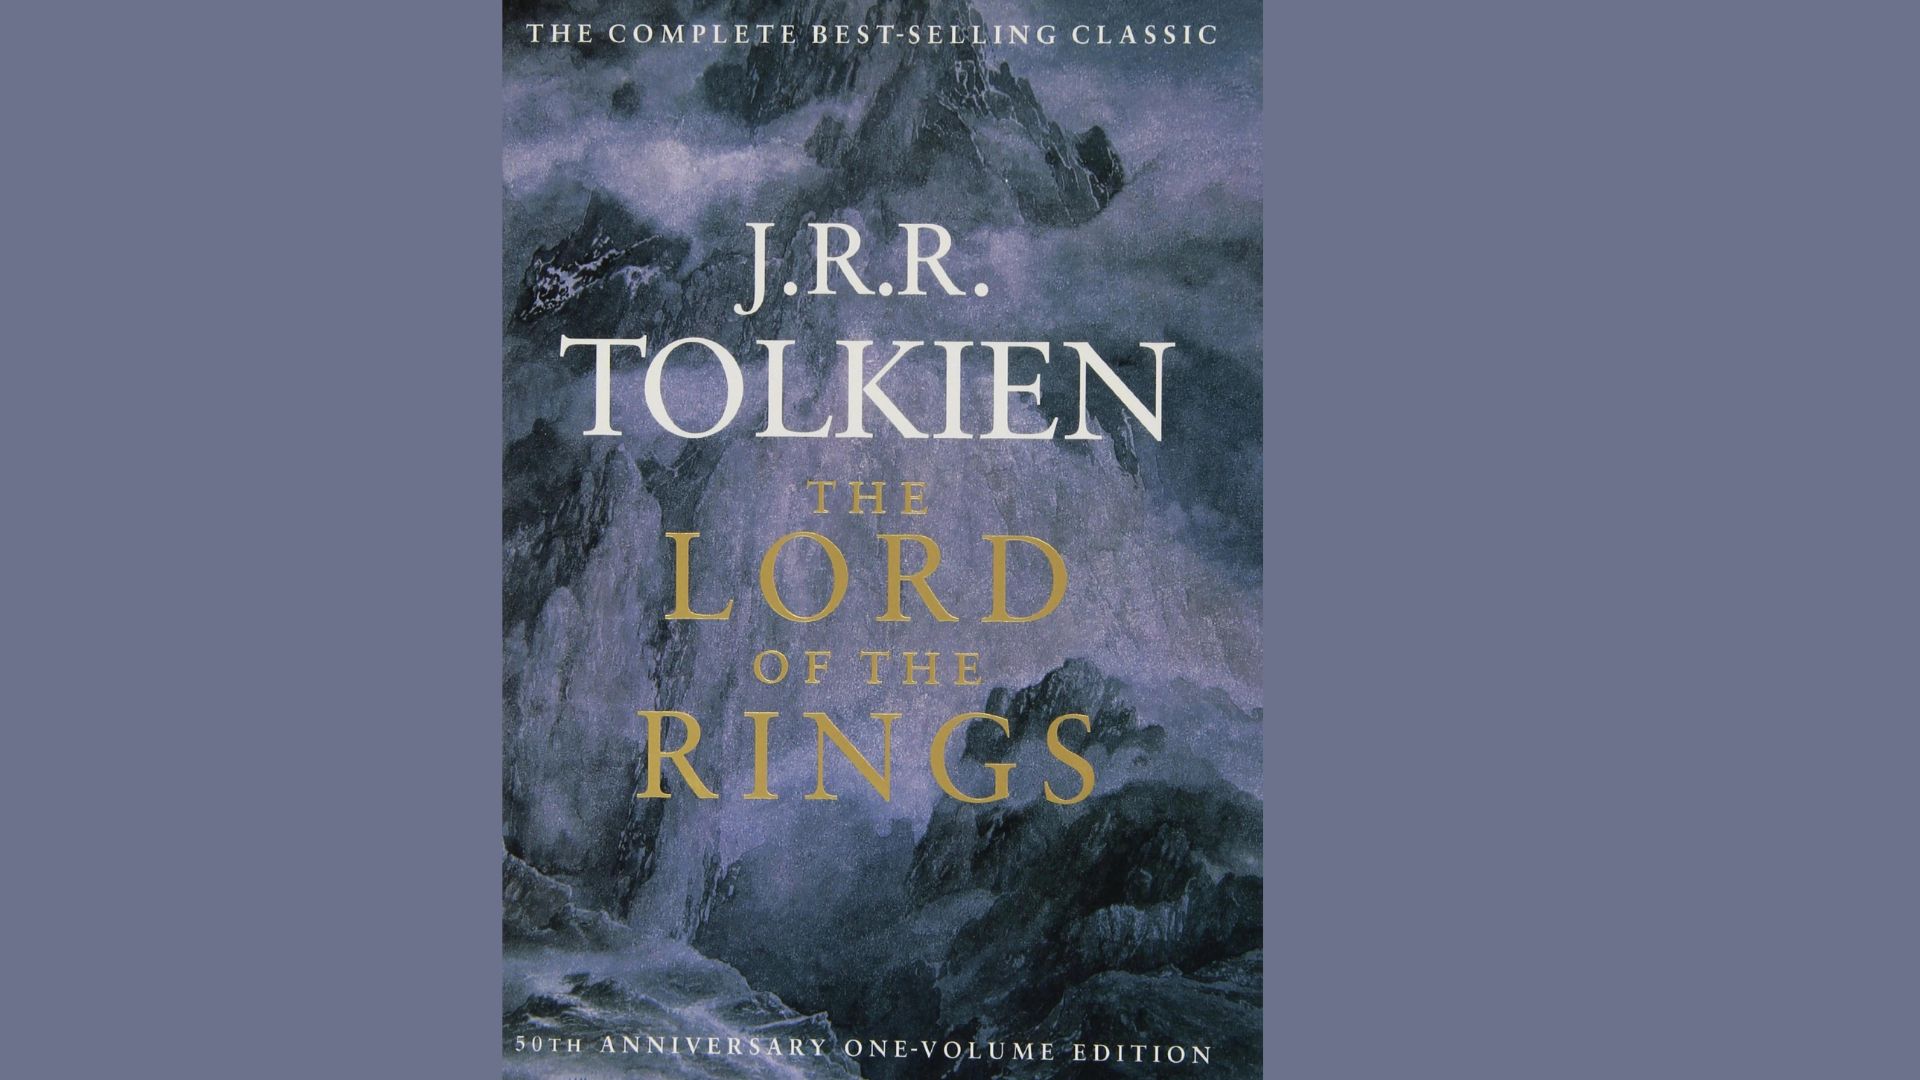 The Lord Of The Rings Series
